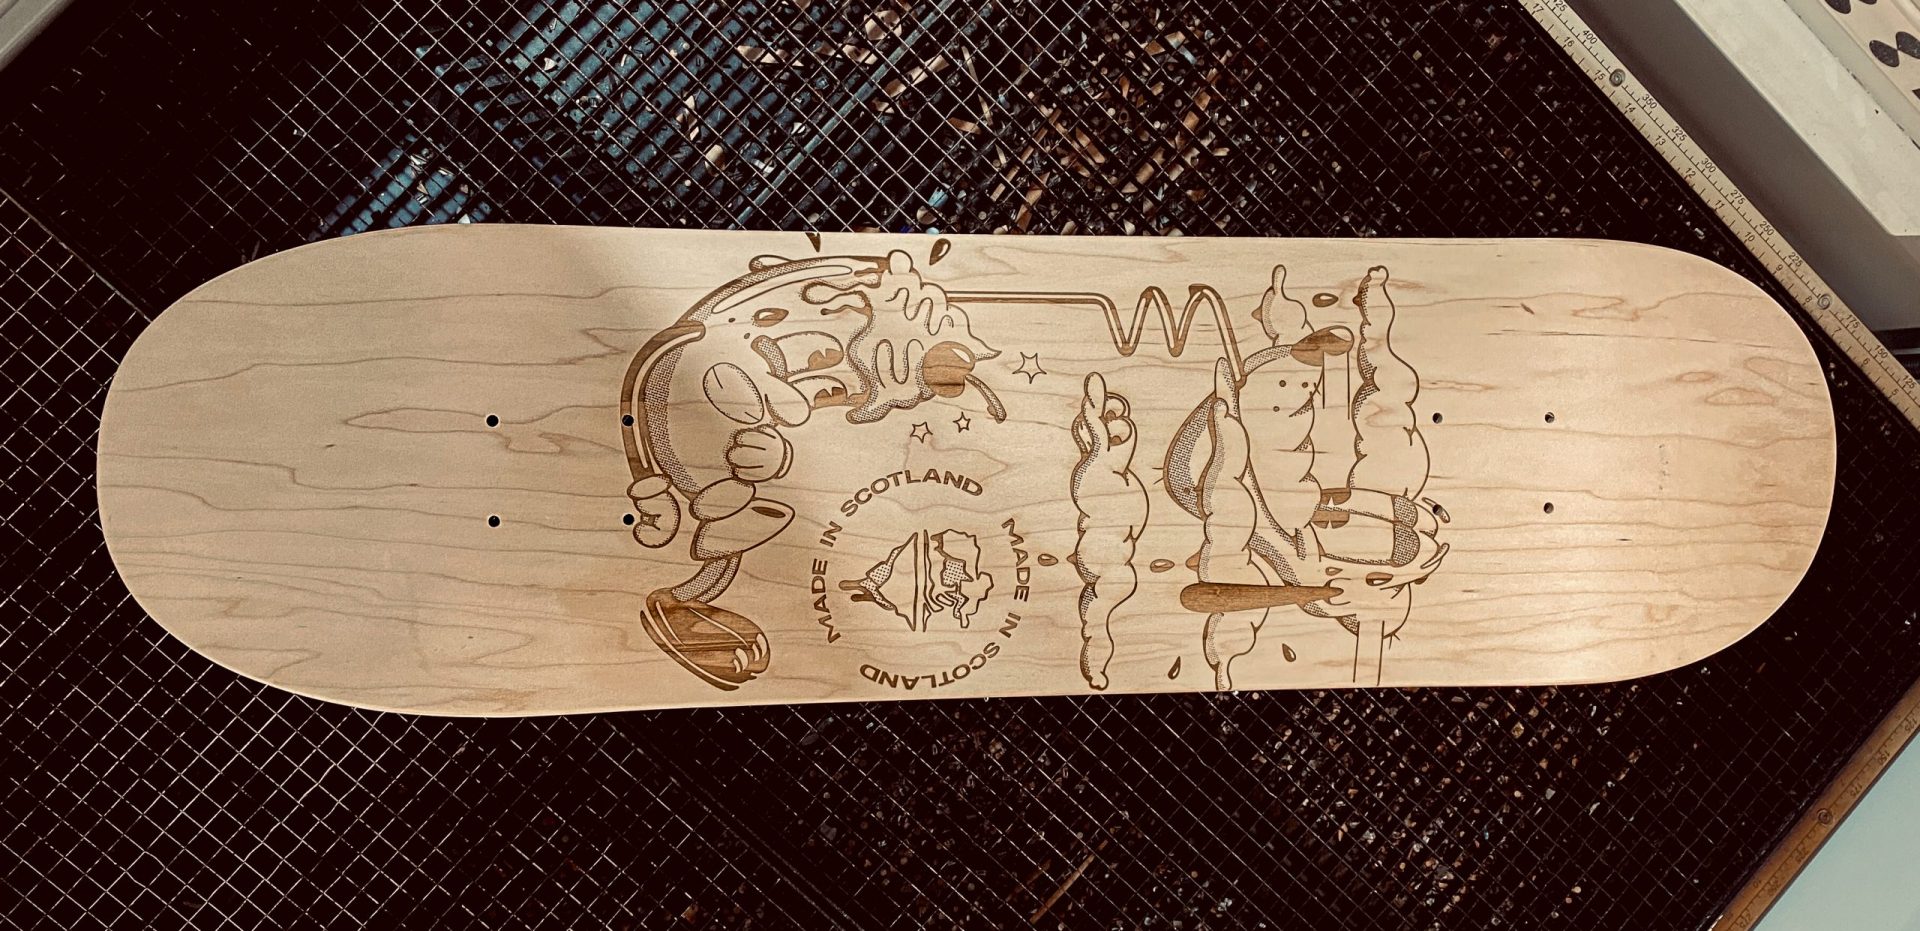 laser engraved skate board cruiser style with bespoke artwork for the bonny co by the altered state